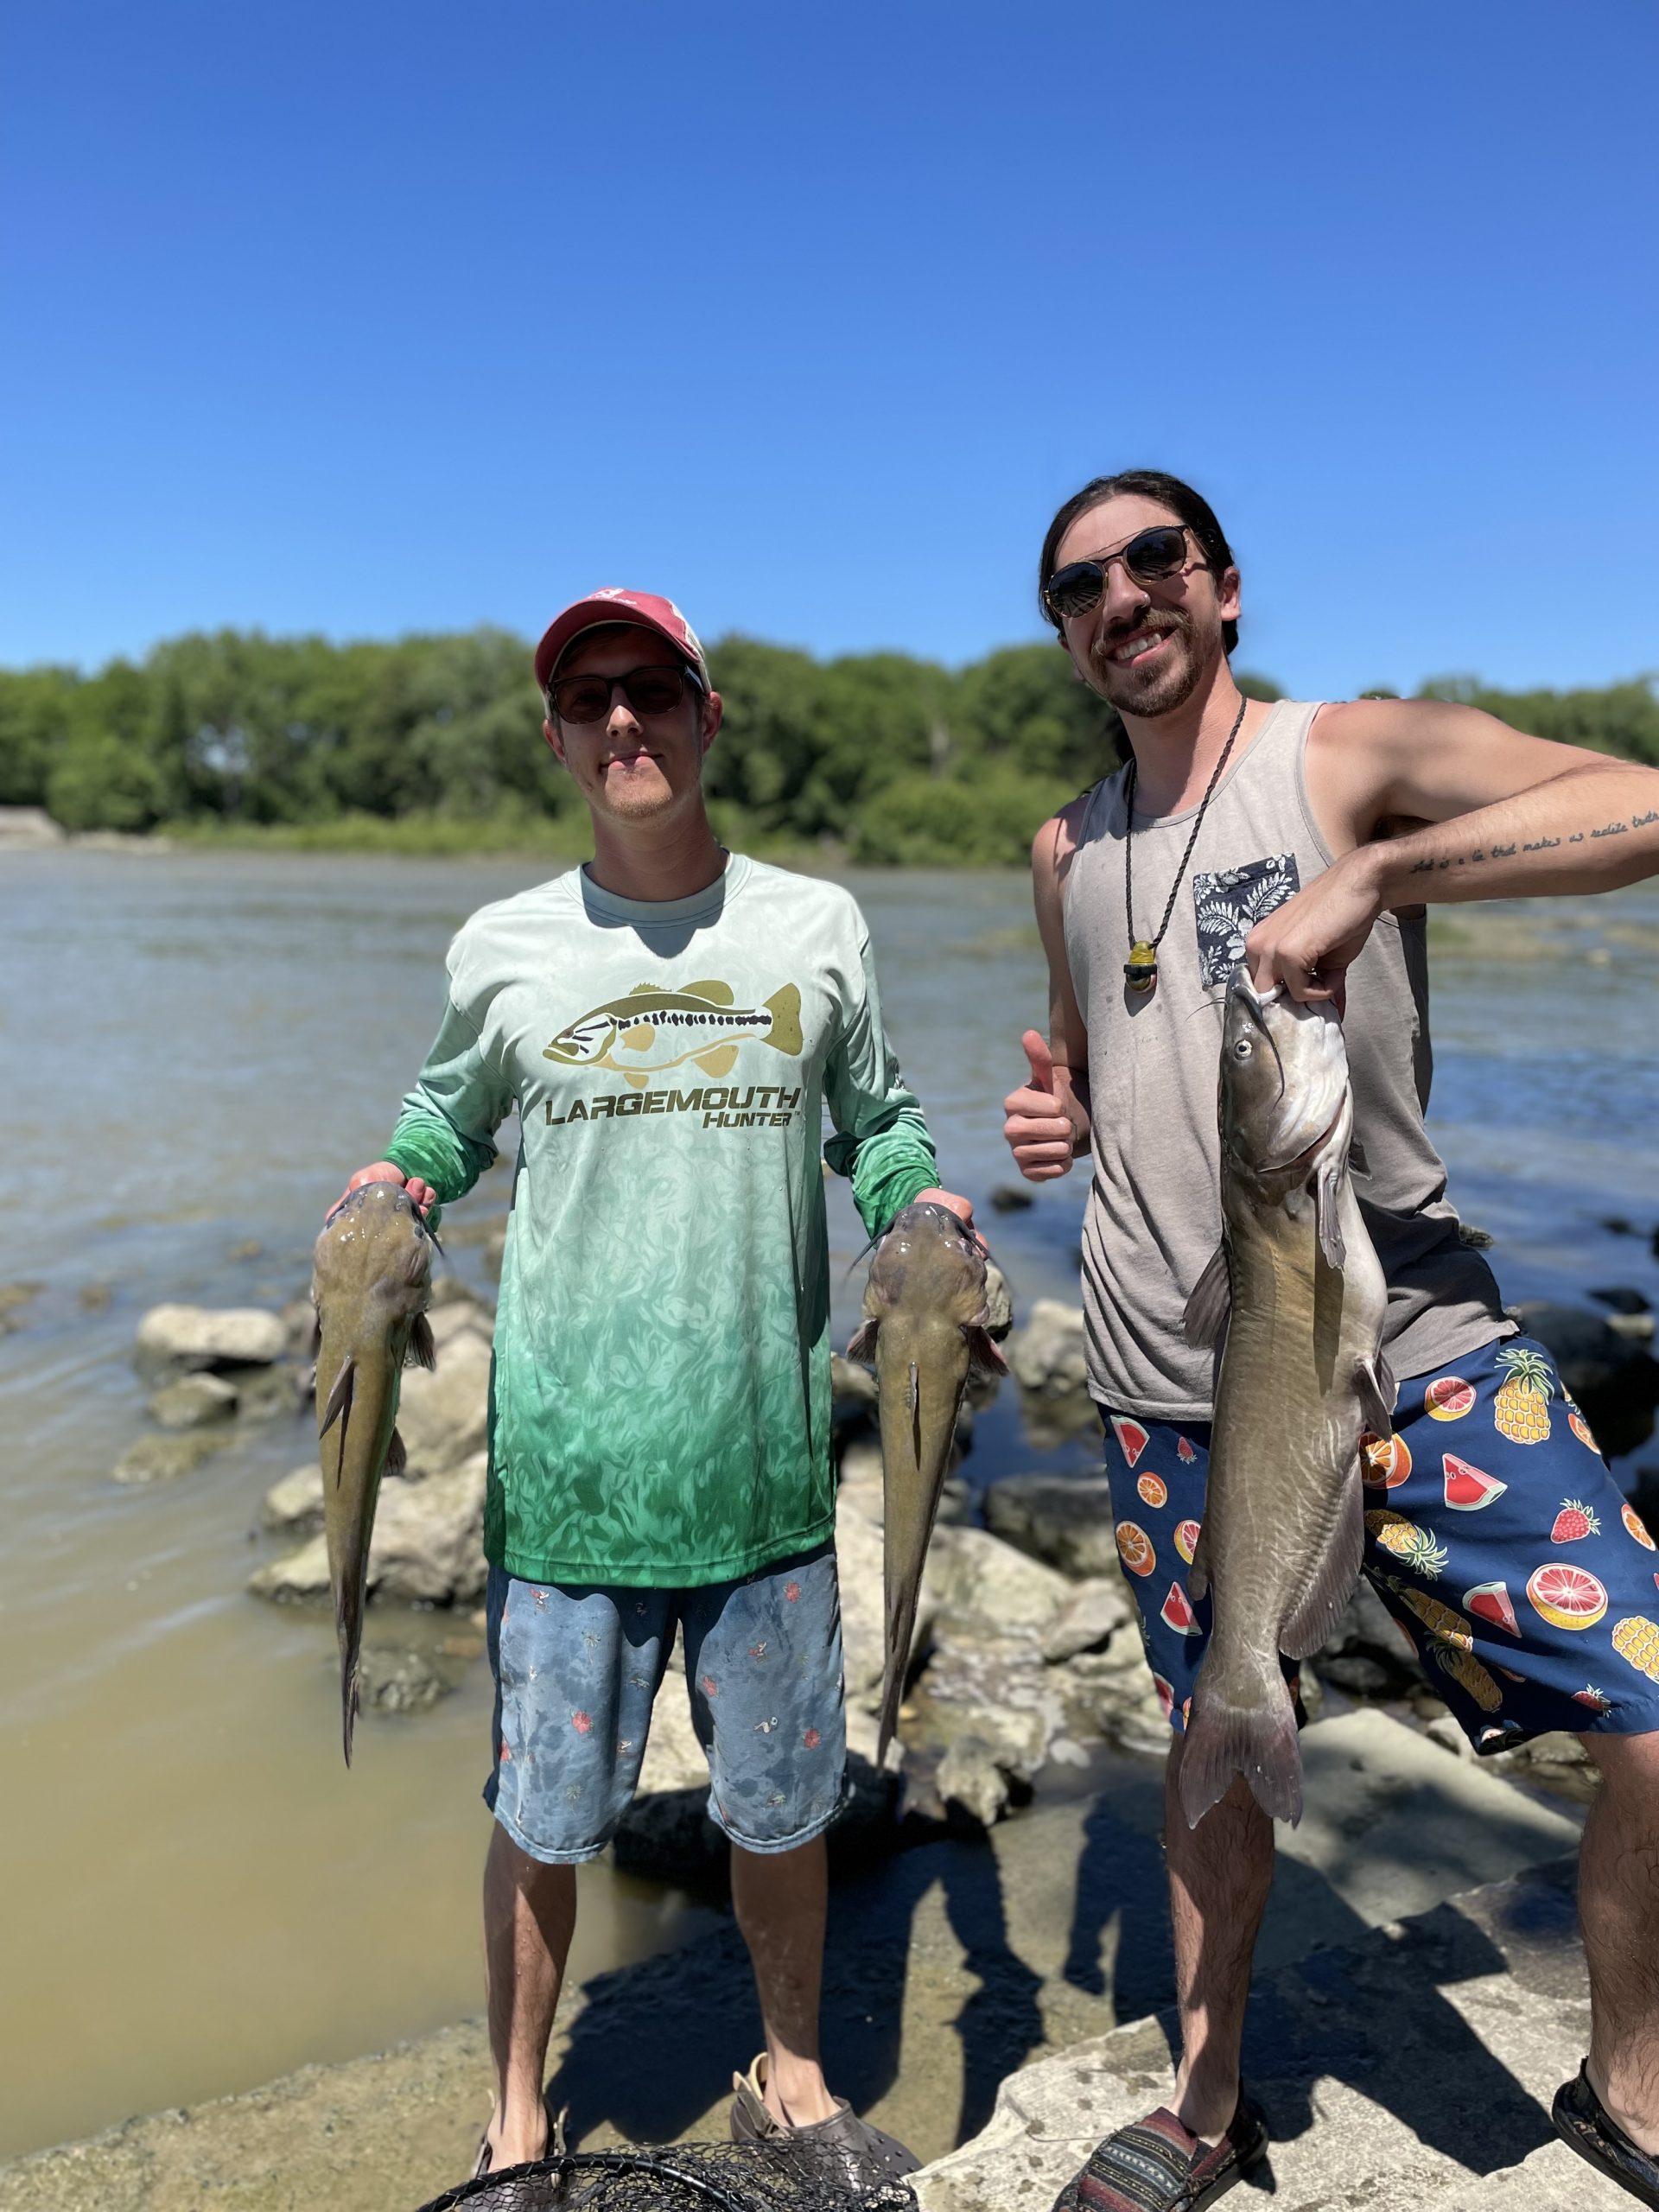 maumee river report – June 25 2022